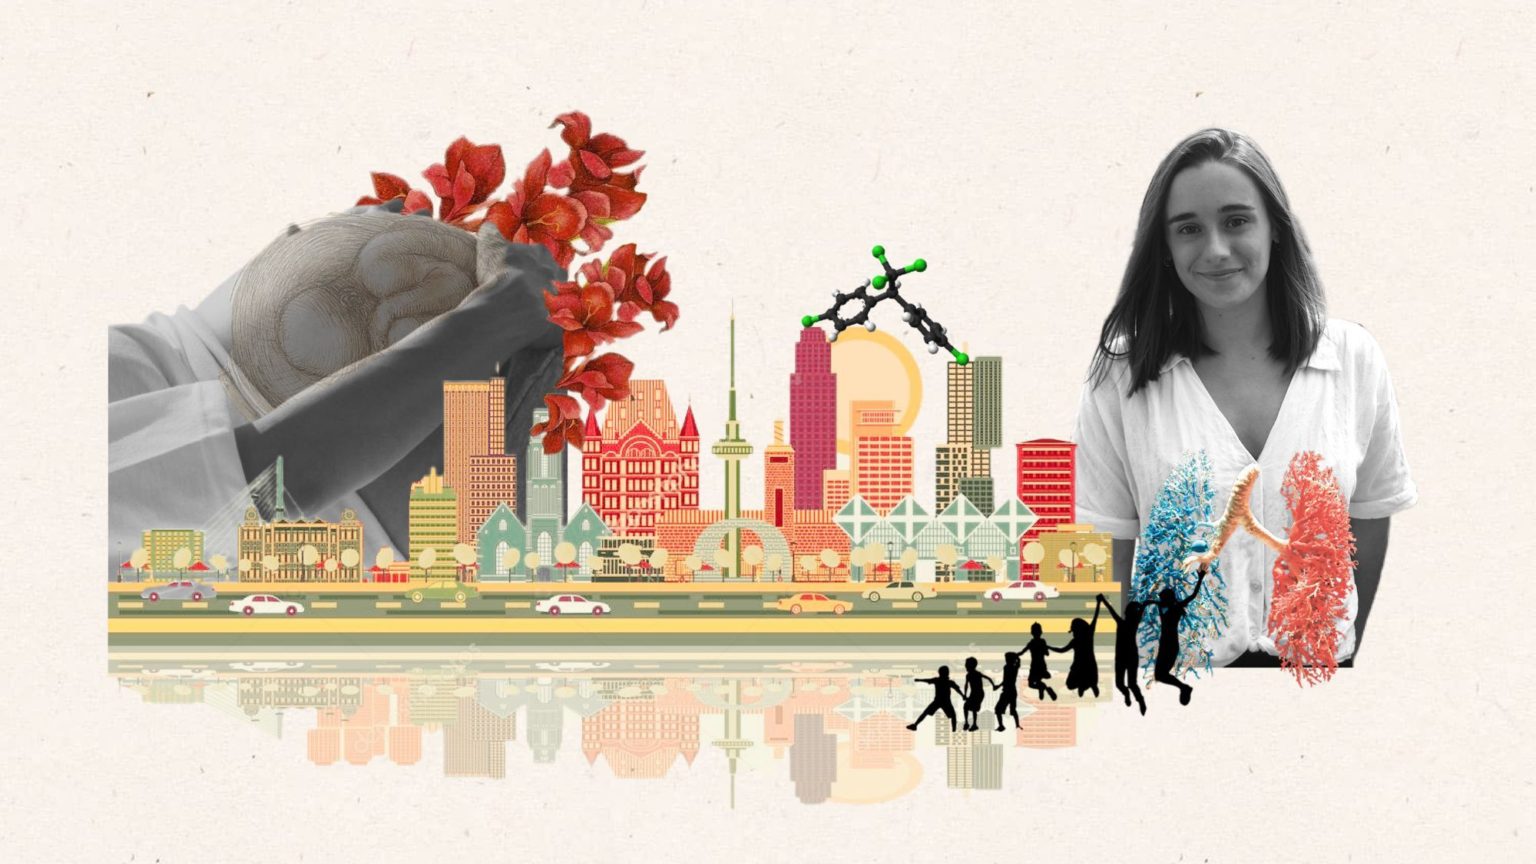 Alicia Abellan represented in a collage created by Raquel Paban Sierra (collagesxrach). Follow her on Instagram.